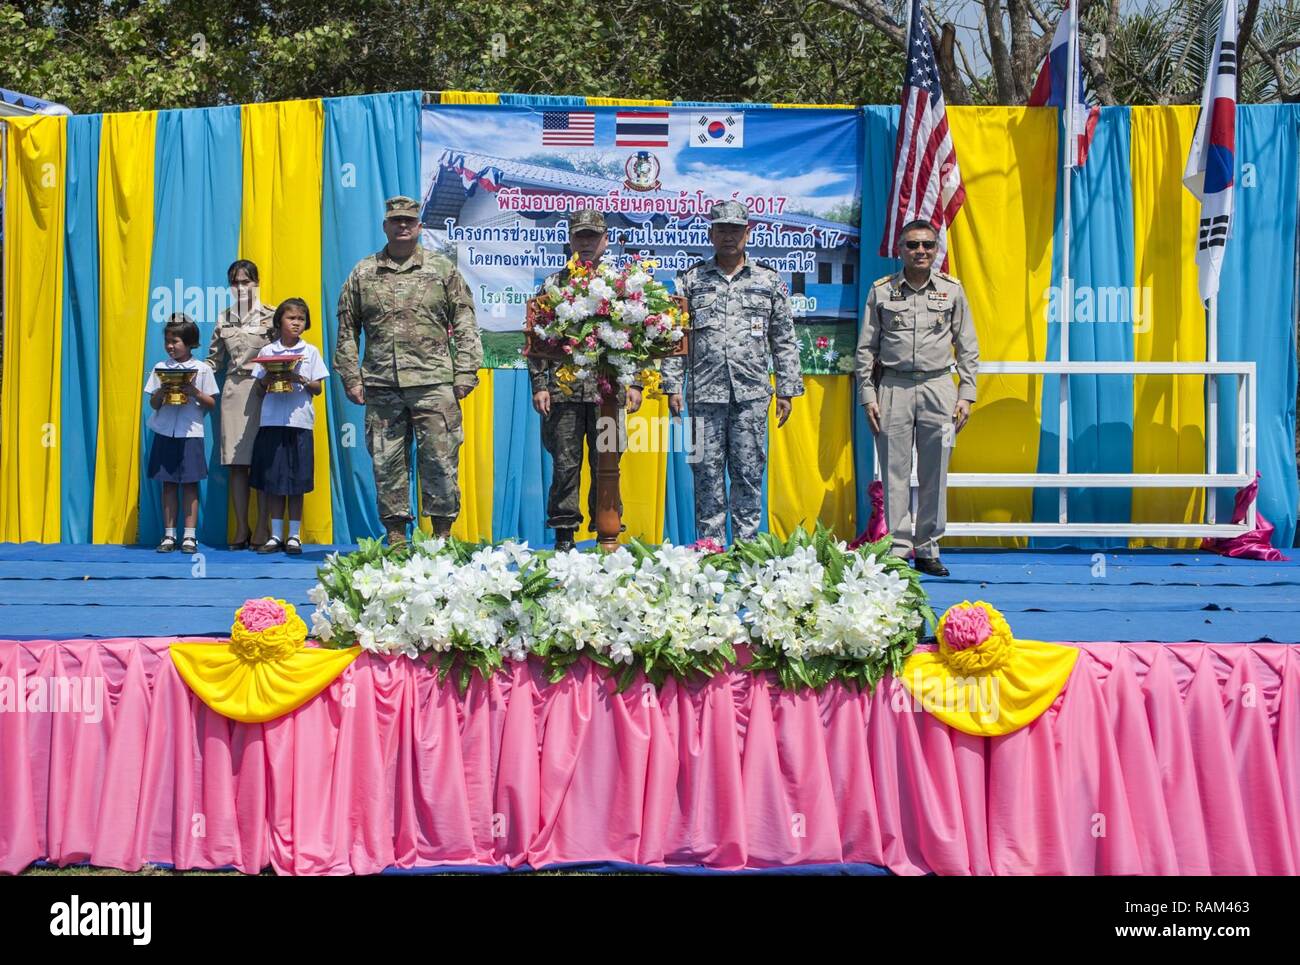 RAYONG PROVINCE, Thailand (Feb. 21, 2017) – (From left to right) Brig. Gen. Bryan Suntheimer, United States Army Pacific Deputy Commanding General for Army National Guard, Rear Adm. Jong Sam Kim, commander, Republic of Korea Navy Component 5, Vice Adm. Panya Lekbua, deputy commander-in-chief, Royal Thai Fleet and Gov. Surasak Charoensirichot, Rayong provincial governor stand on stage during a dedication ceremony, marking the completion of the Ban Nong Muang school expansion project. The project was a joint effort by the U.S. Naval Mobile Construction Battalion 5, Construction and Developmental Stock Photo